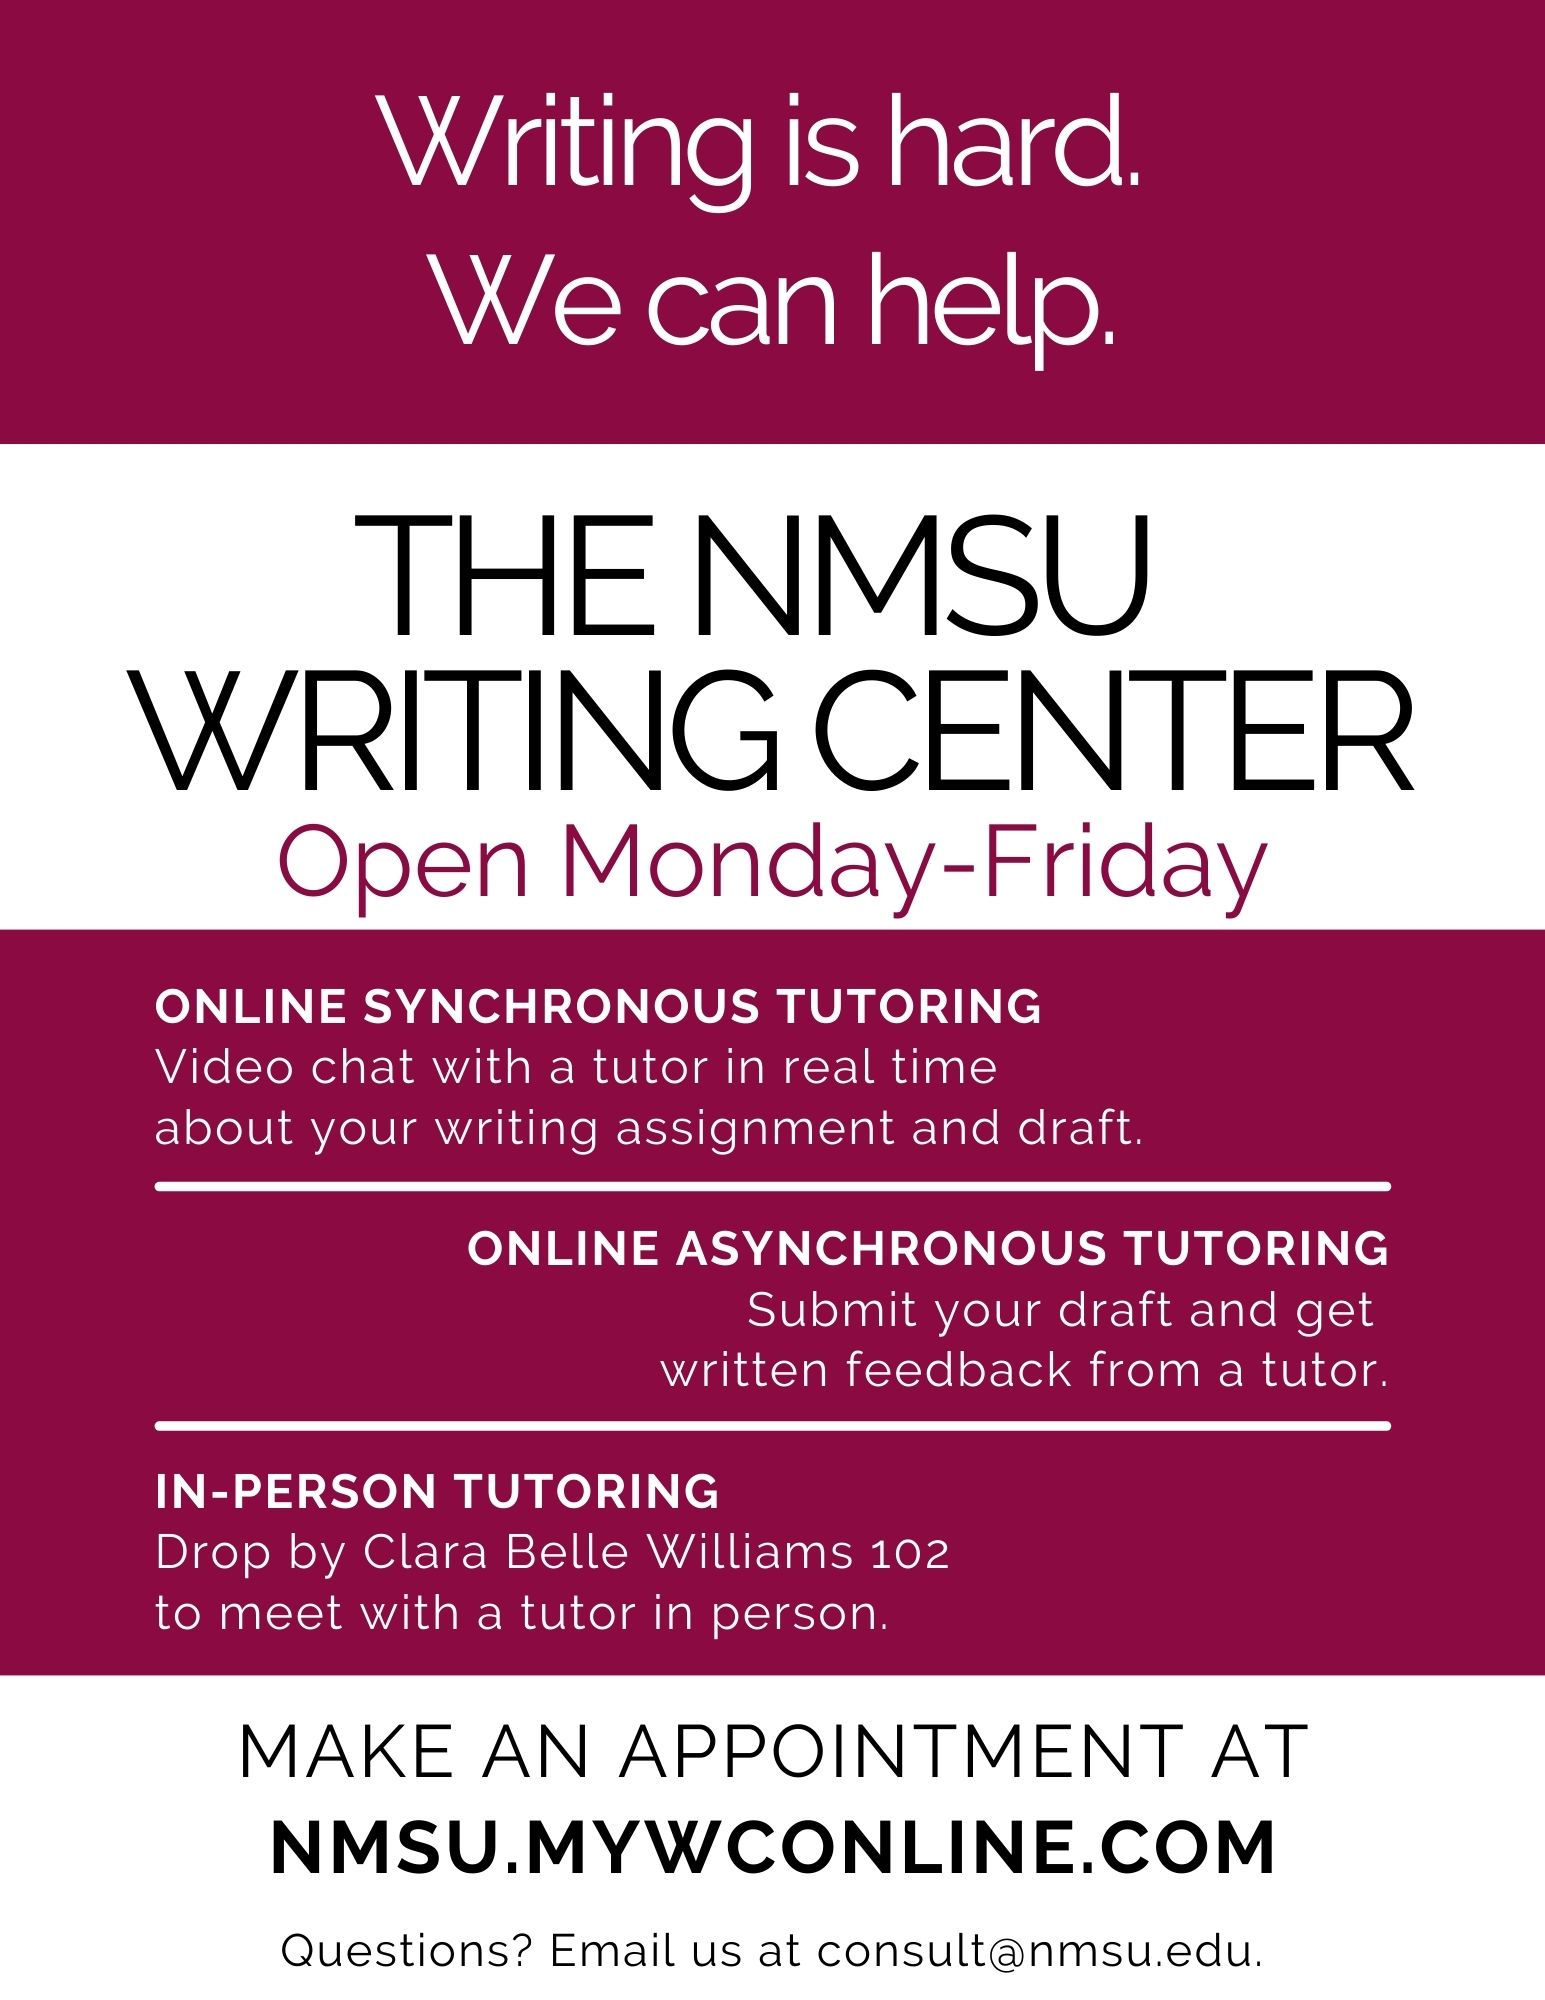 Flyer with text "Writing is hard. We can help. NMSU Writing Center, Open Monday-Friday